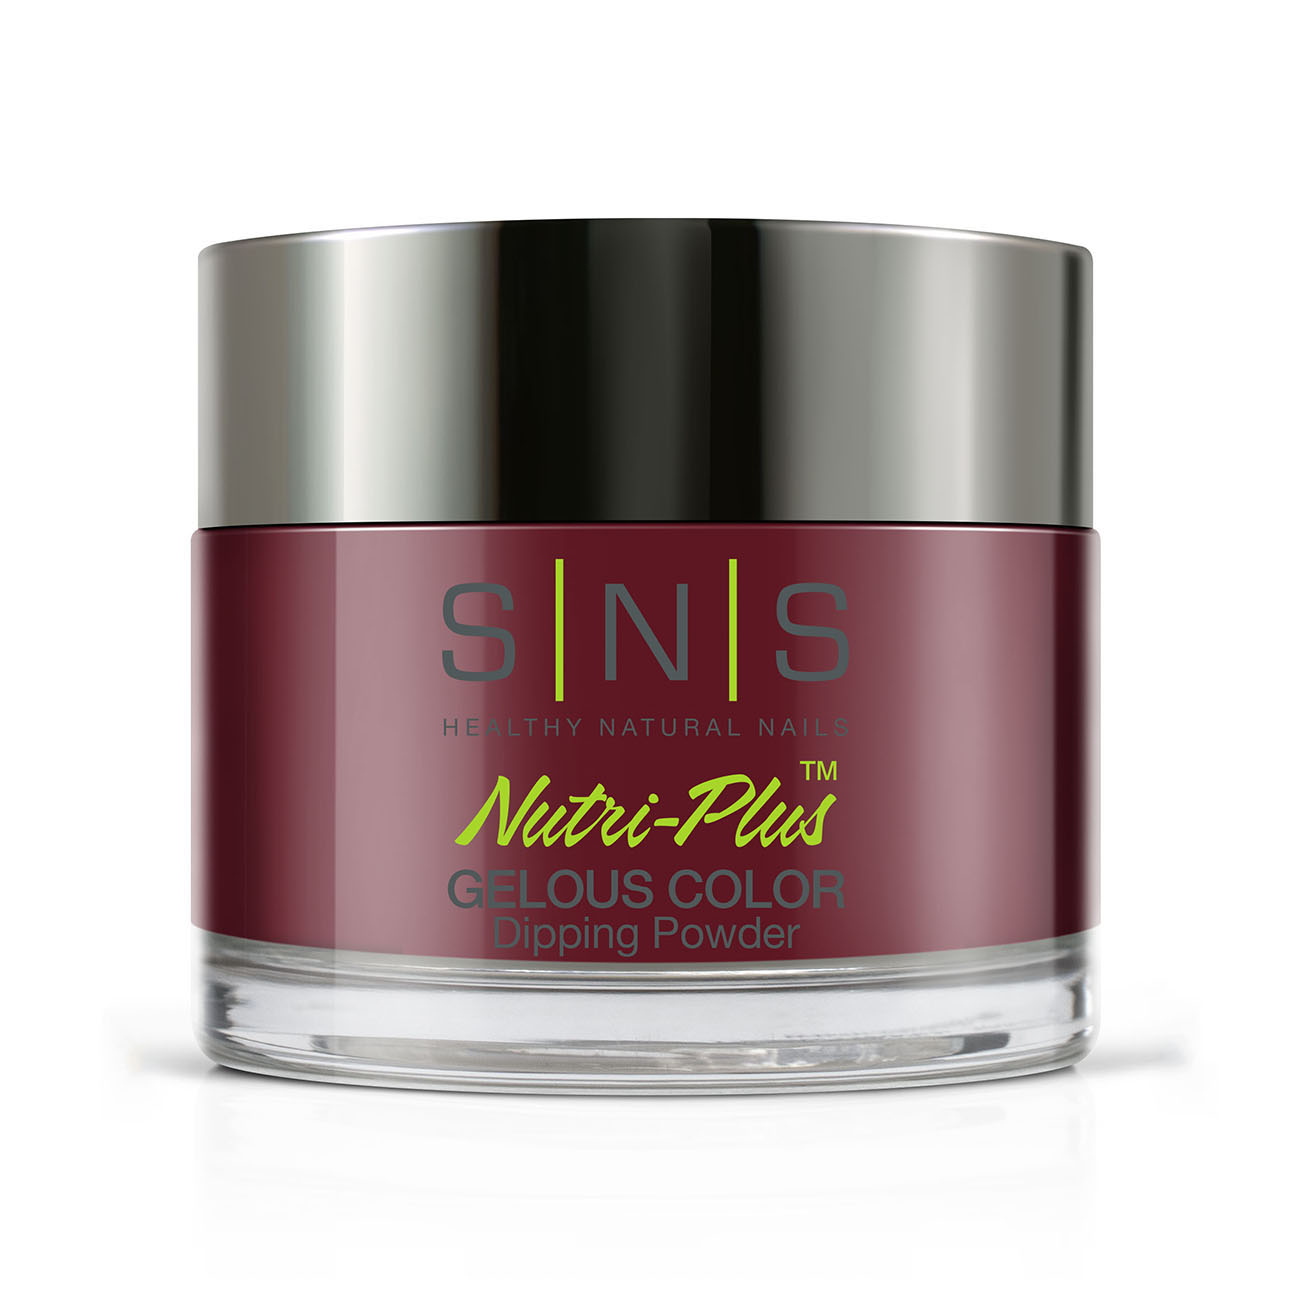 SNS Nails CT05  New York Minute 28g (1oz) | Gelous Dipping Powder